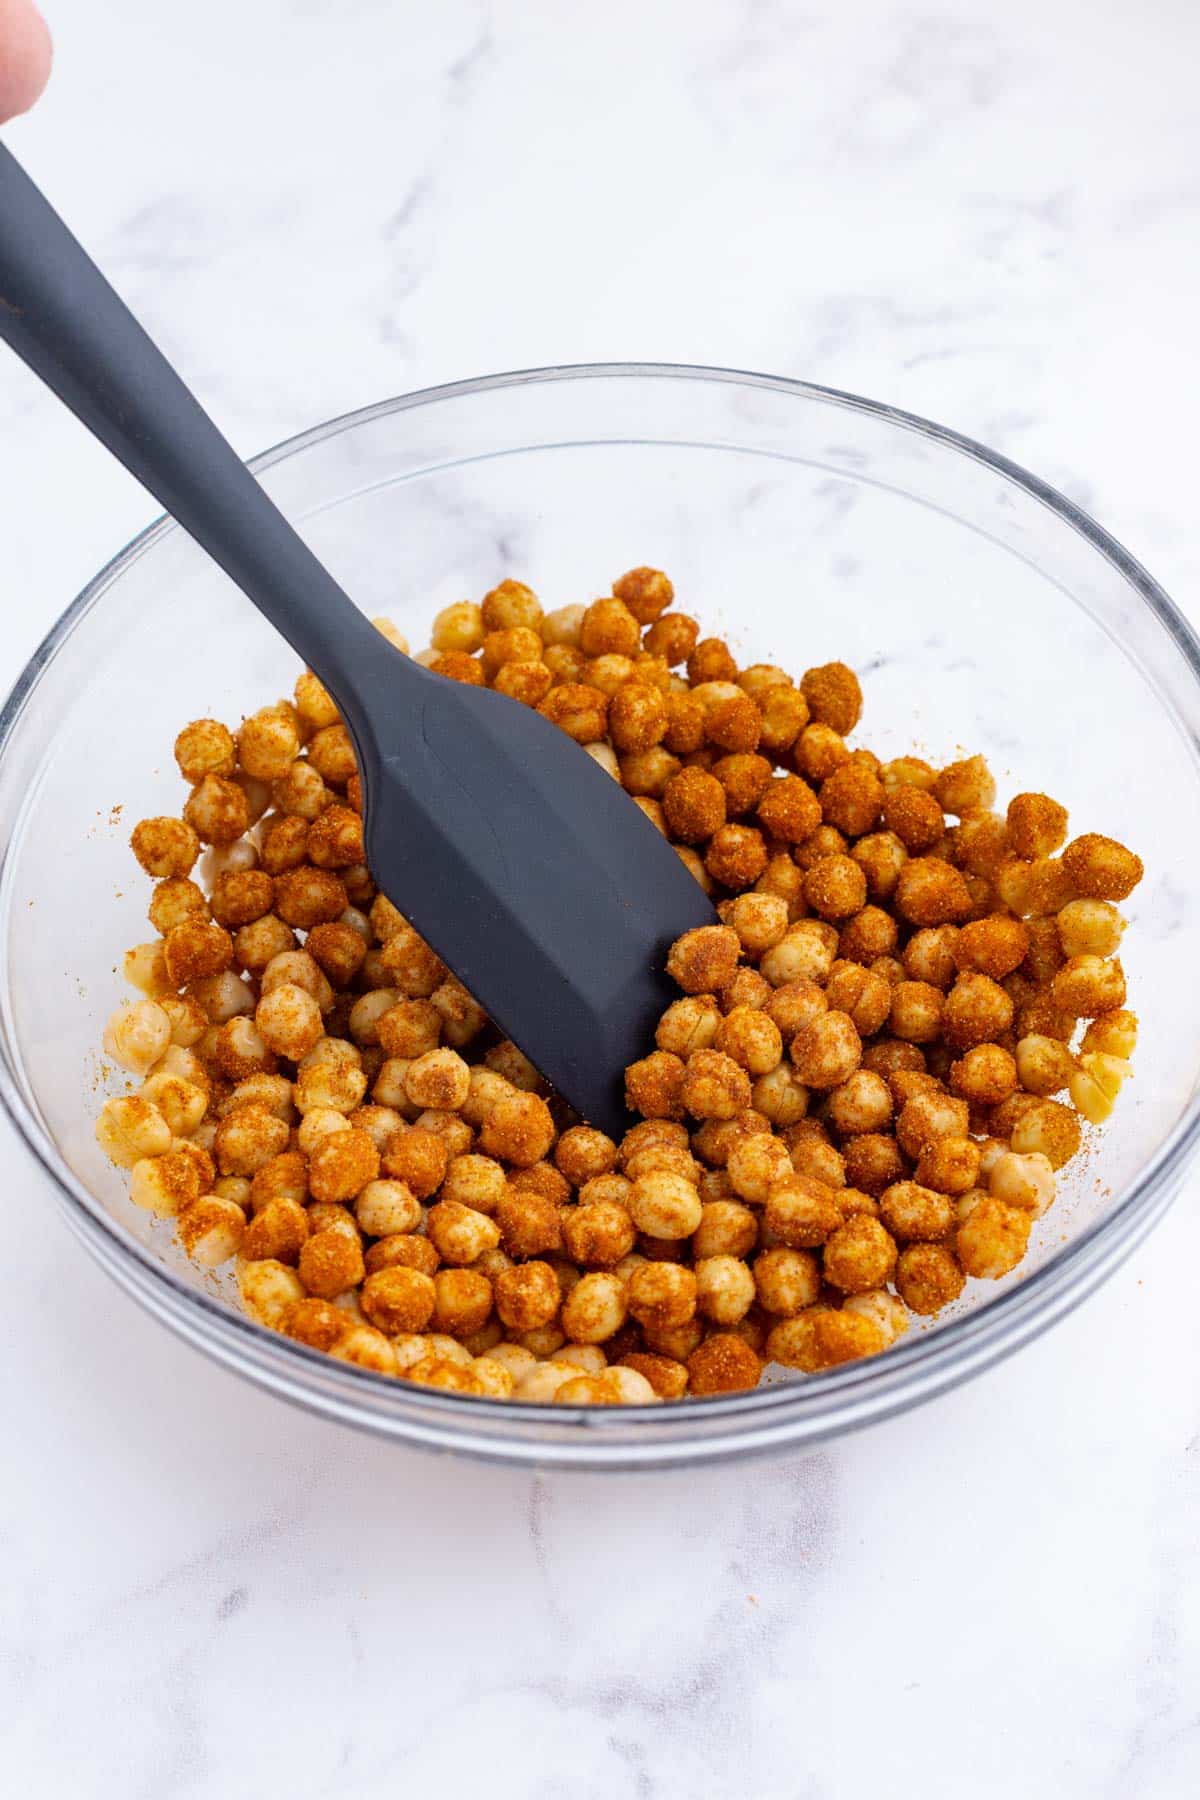 Chickpeas are stirred to mix with the seasonings.